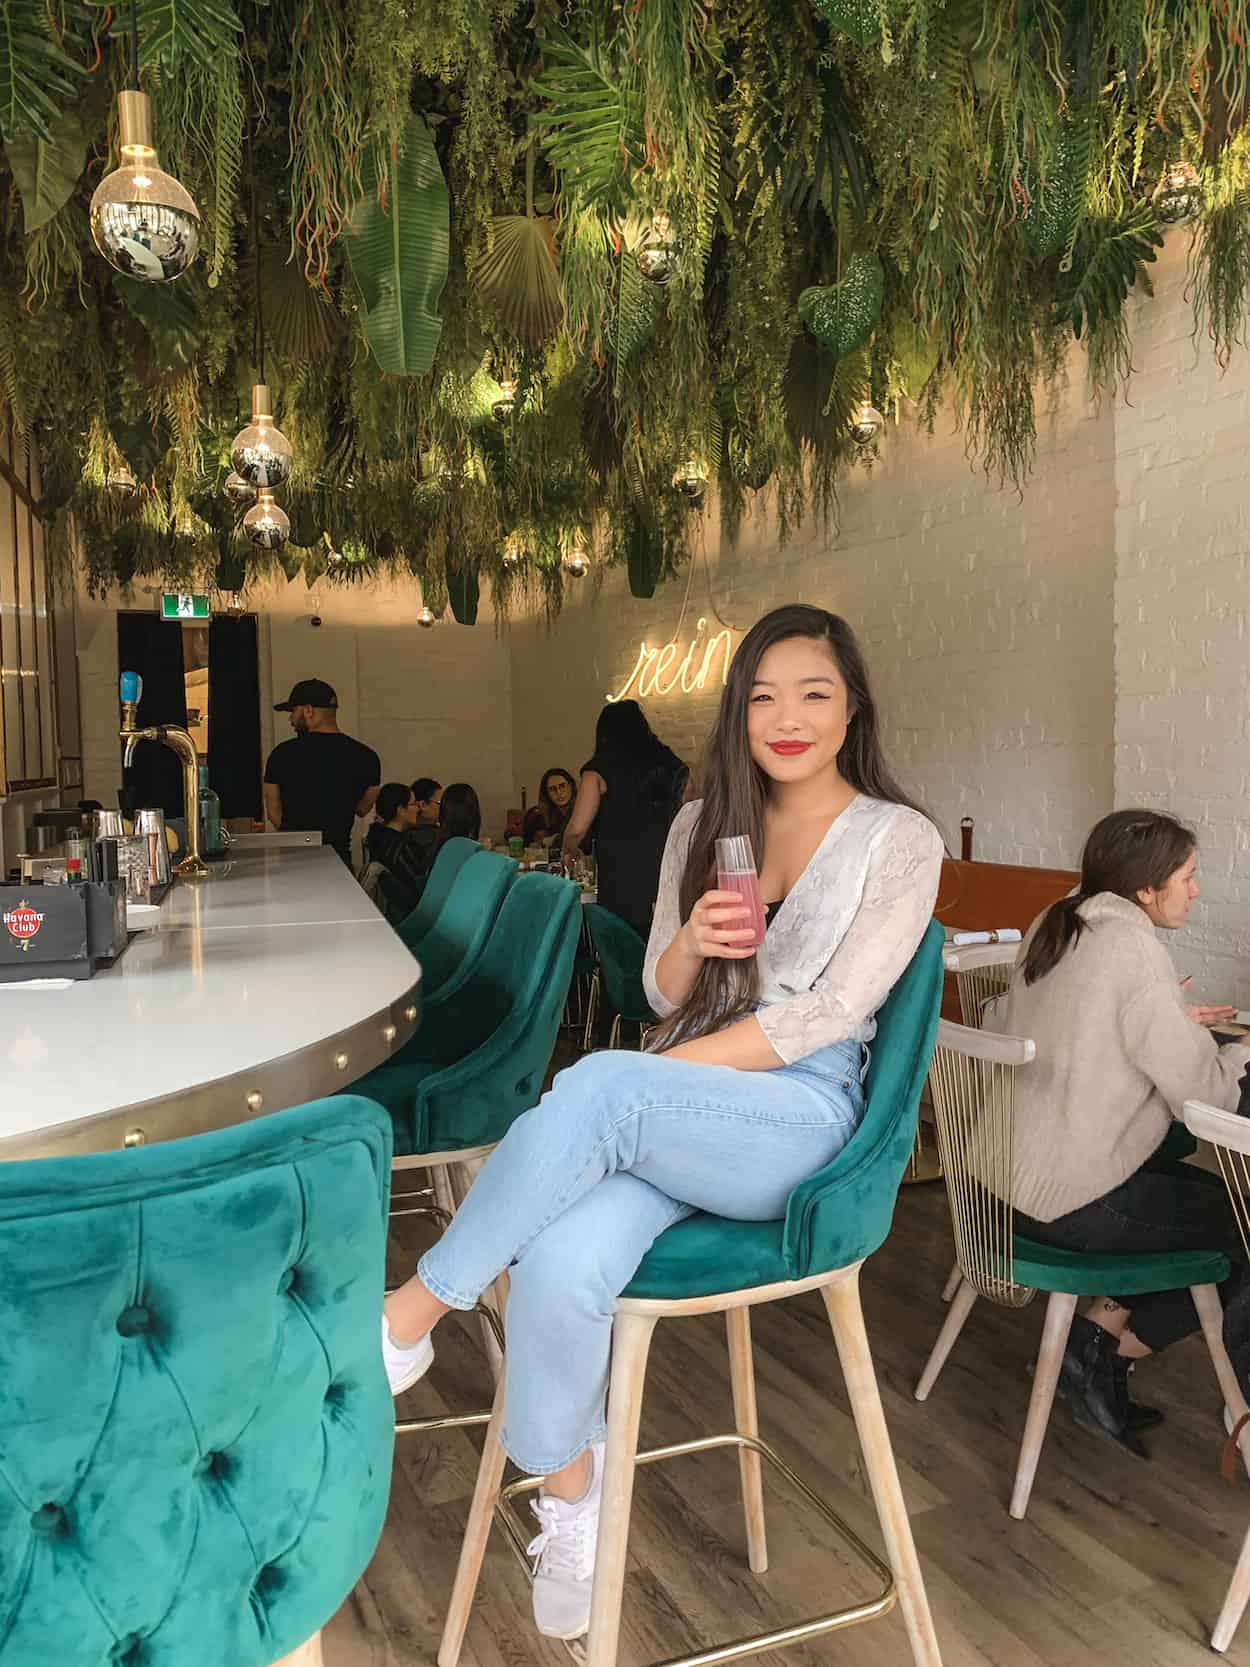 Reyna on King is one of the most Instagrammable brunch spots in Toronto